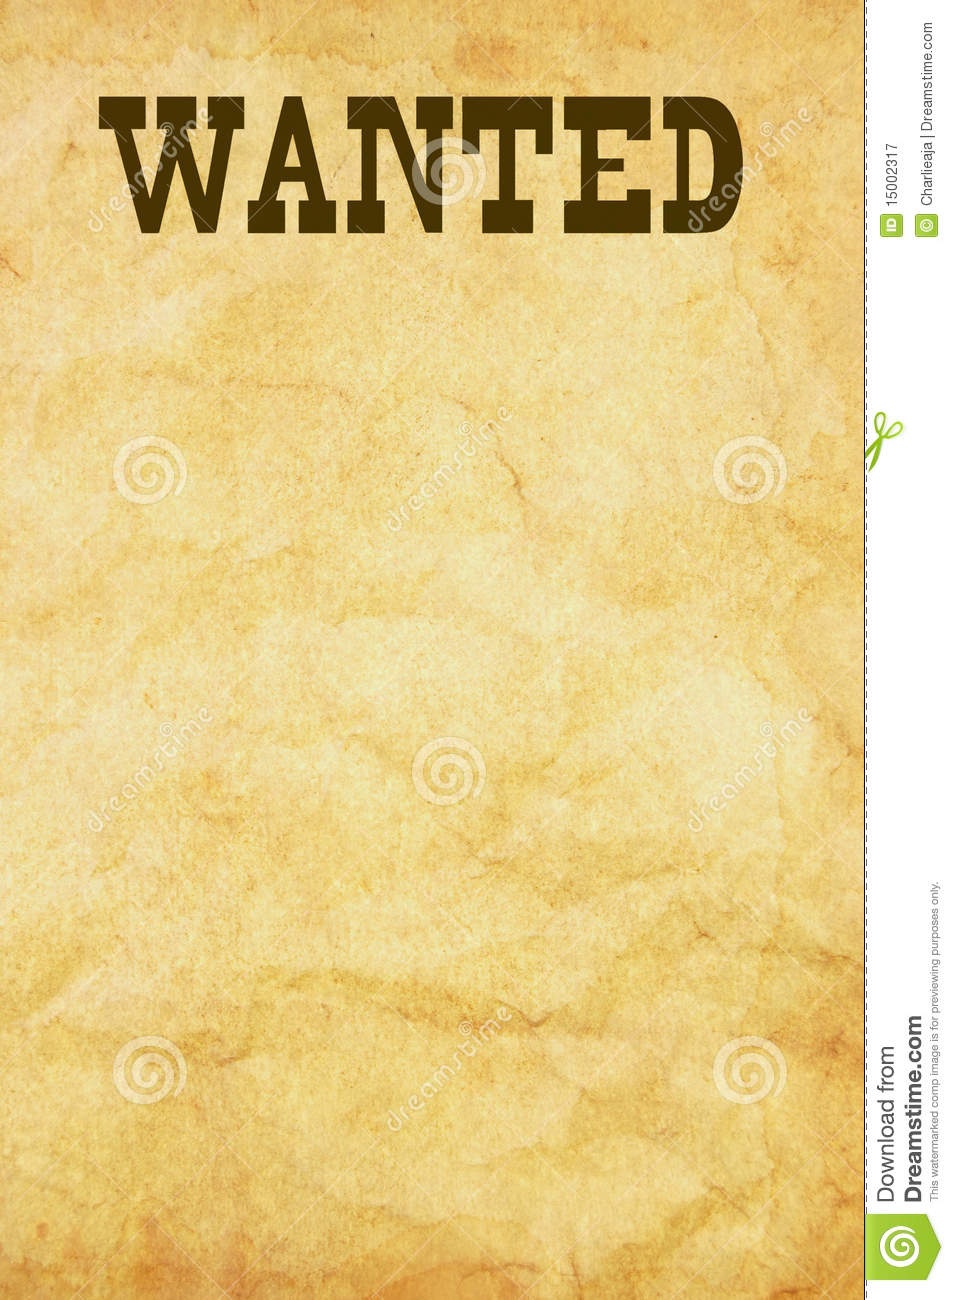 Wanted Poster Stock Illustration. Illustration Of Advert - 15002317 - Free Printable Wanted Poster Invitations